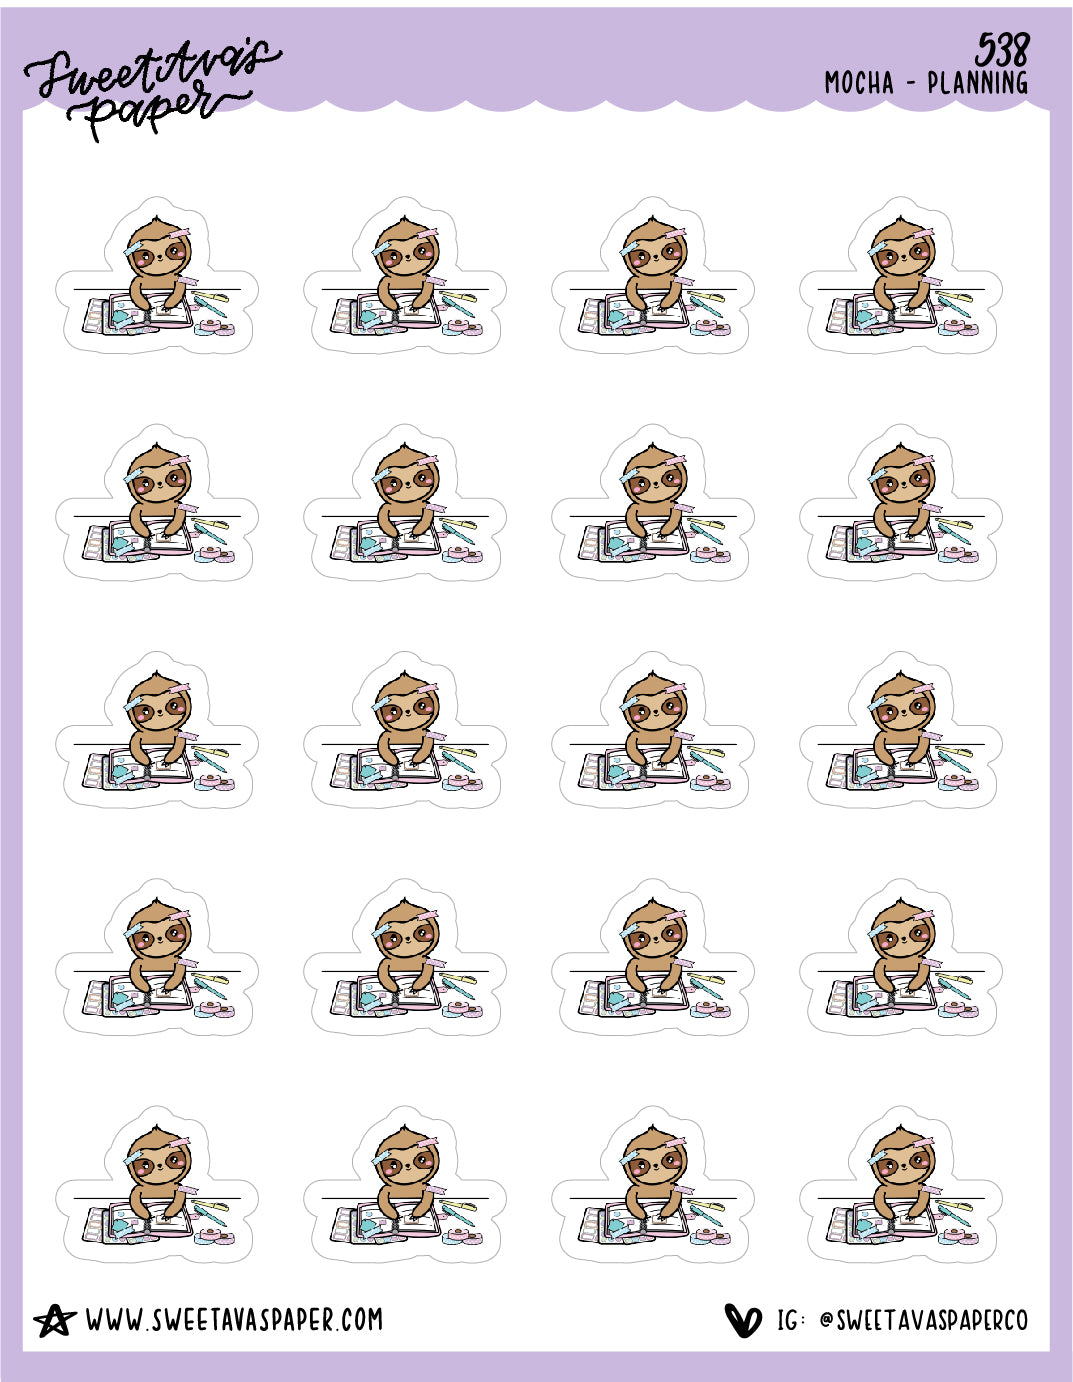 Planning With Stickers Planner Stickers - Mocha The Sloth [538]